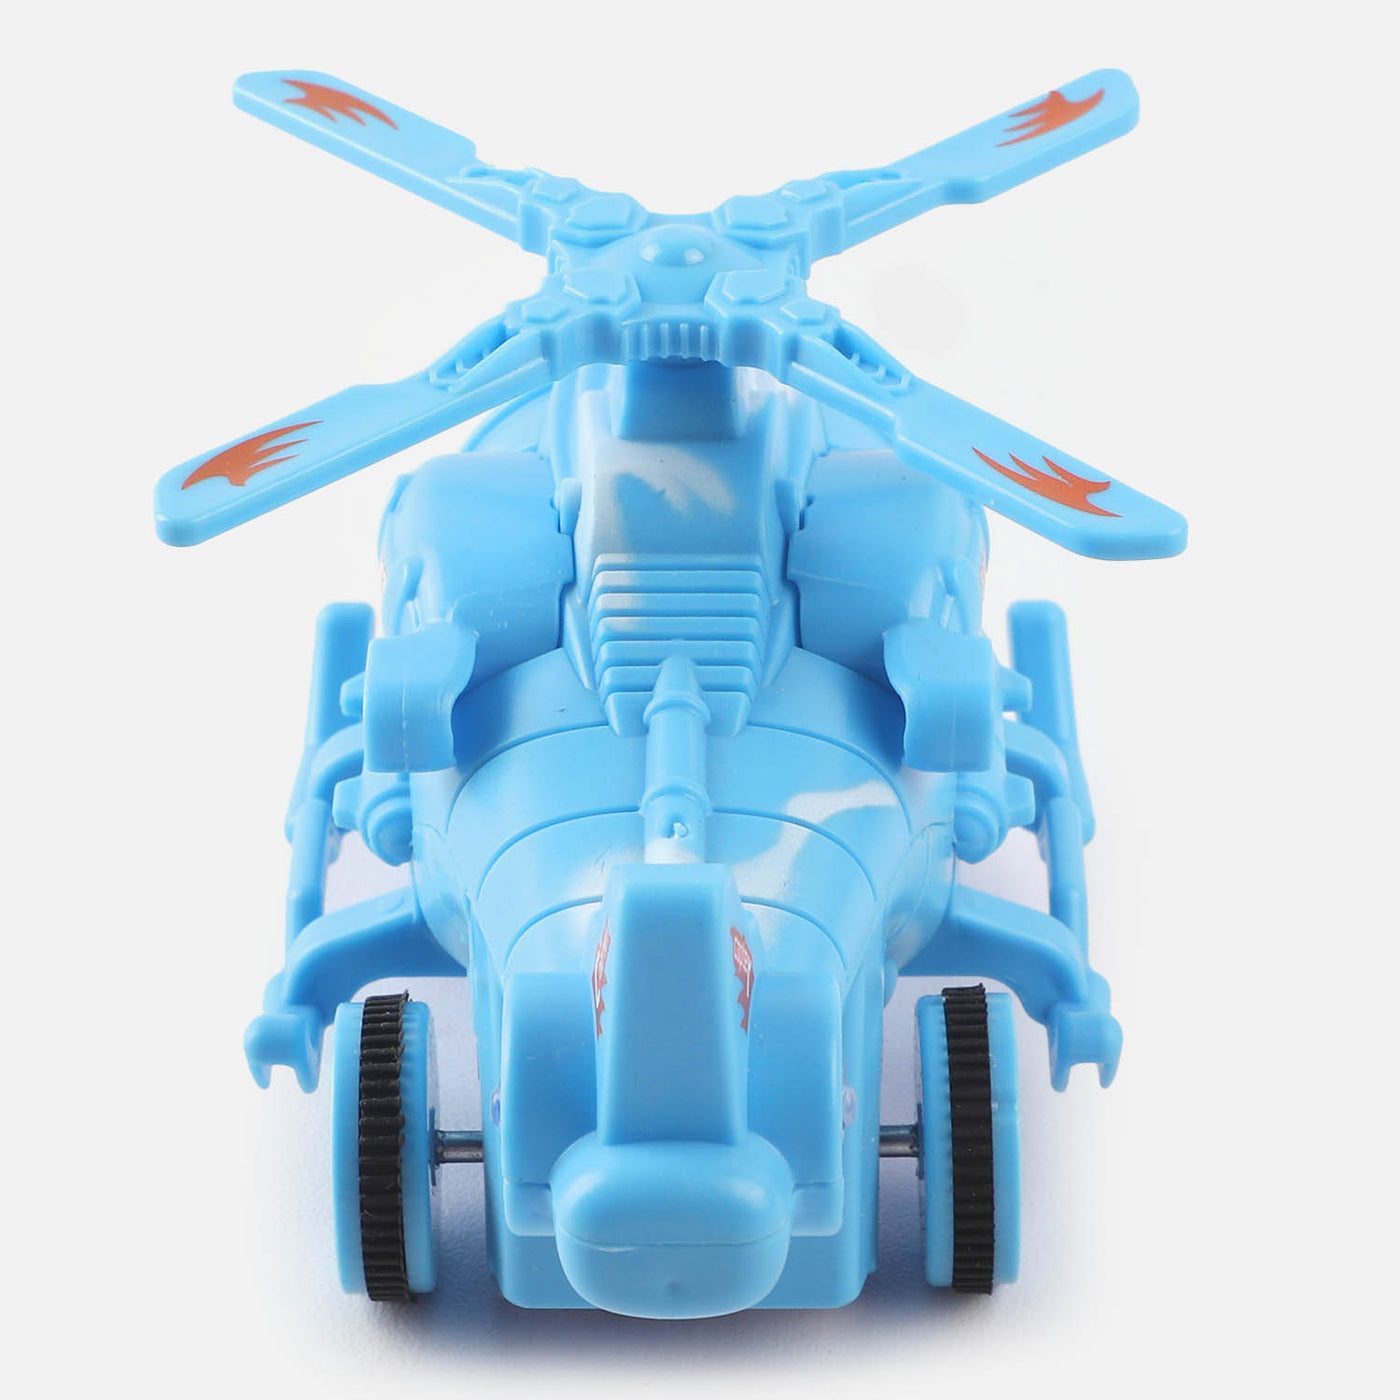 Helicopter Friction Toy For Kids